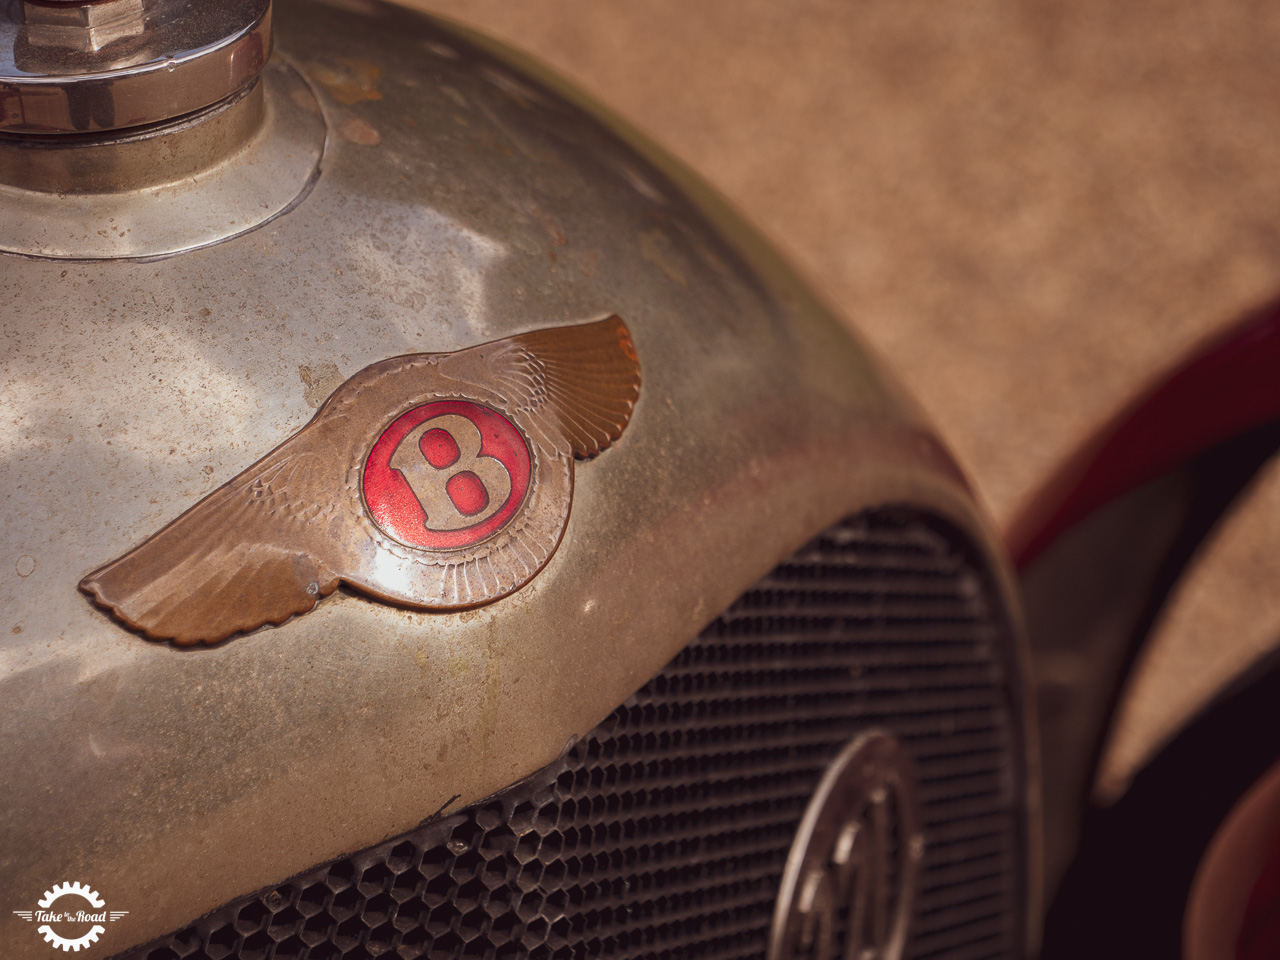 100 years since Bentley’s first ever race win at Brooklands